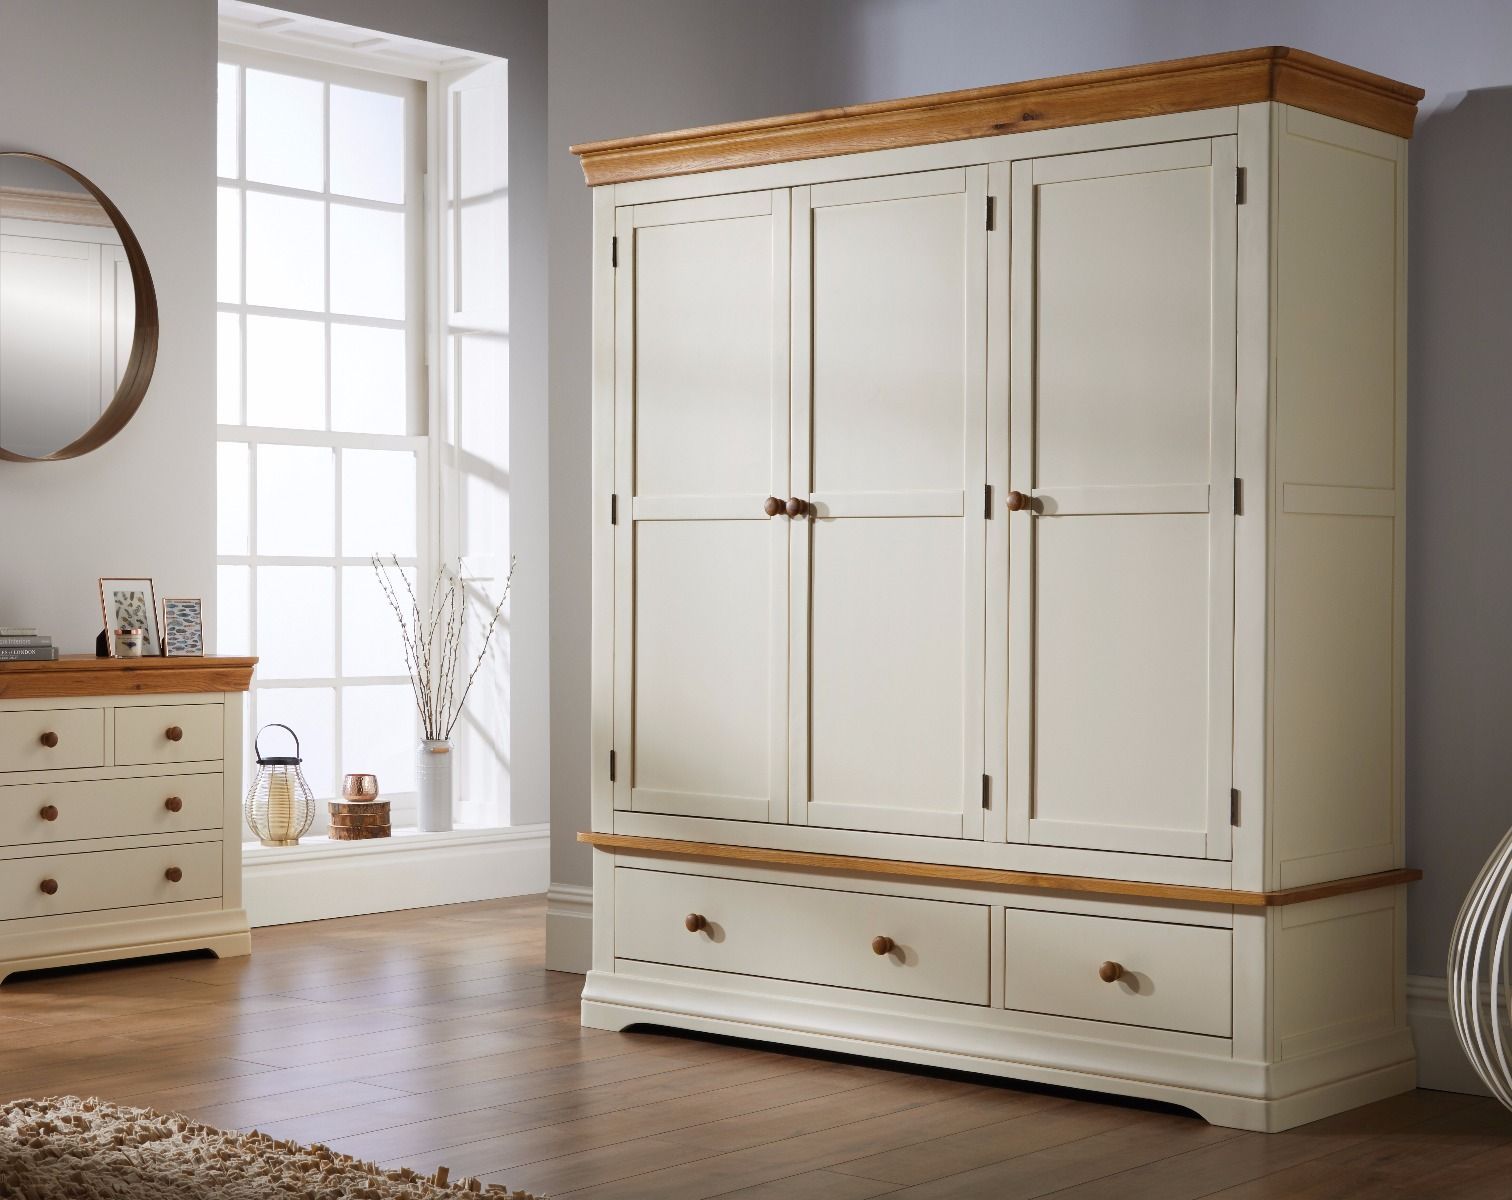 Farmhouse Cream Painted Triple Oak Wardrobe – Free Delivery | Top Furniture Intended For Oak Wardrobes For Sale (View 12 of 15)